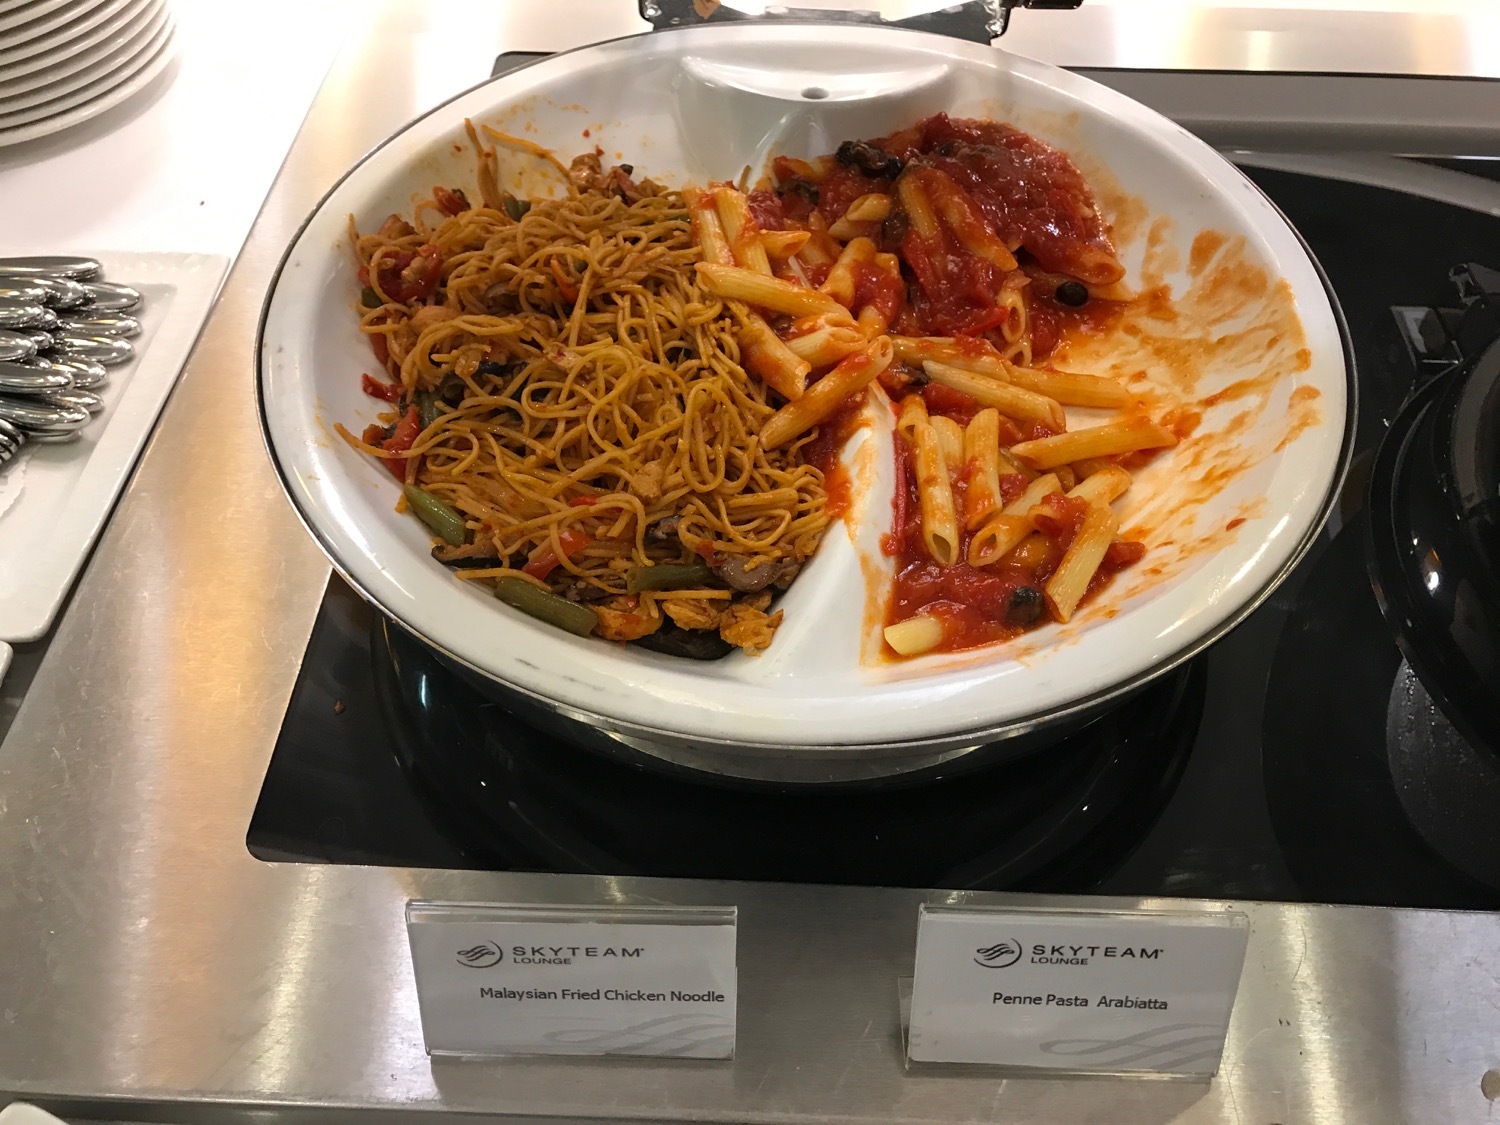 a plate of pasta and sauce on a stove